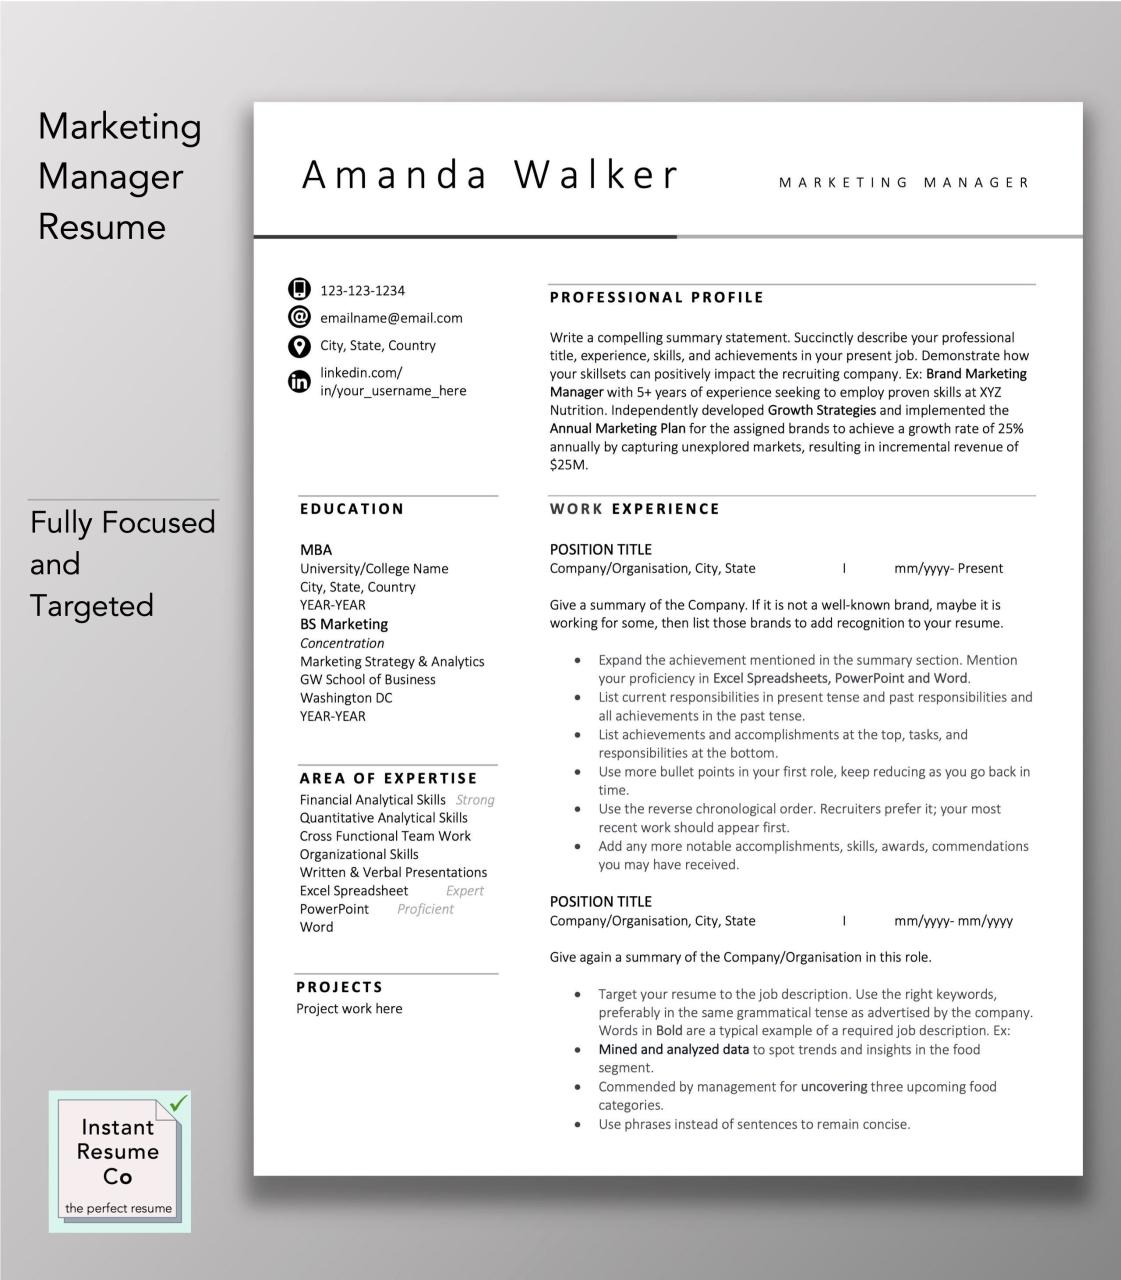 Program Manager Resume Examples 2018